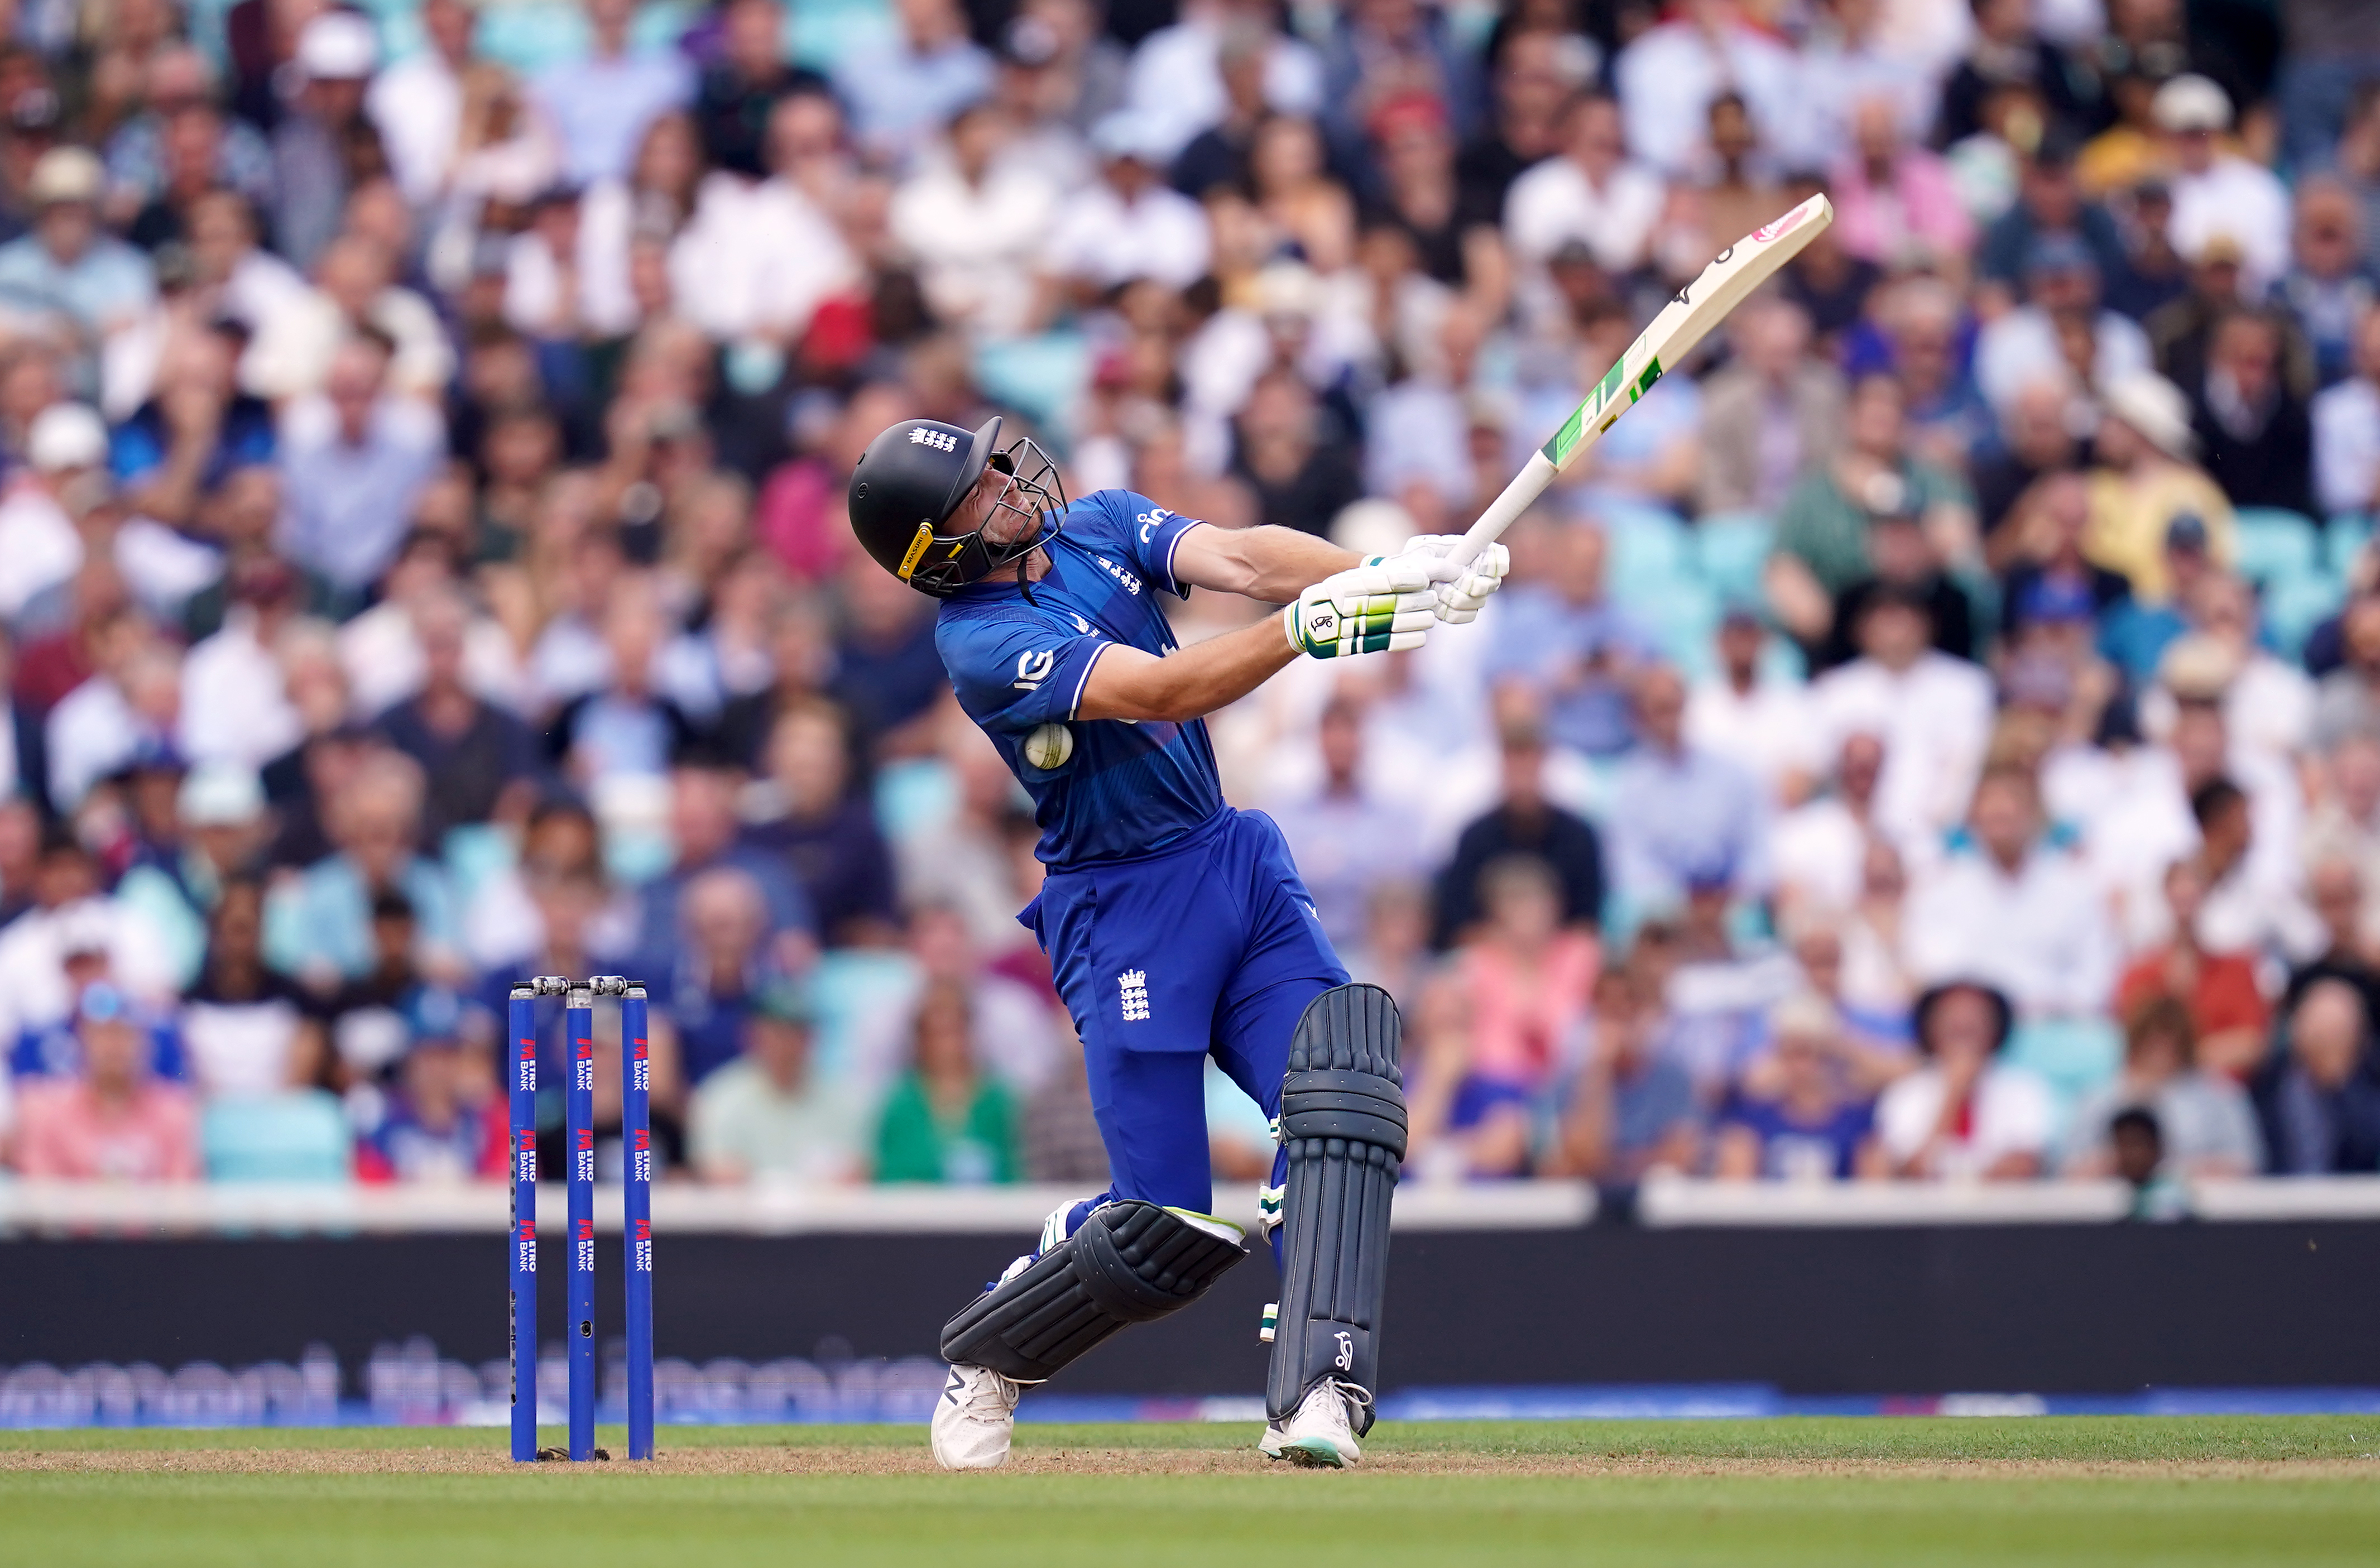 Buttler wants to see his side embrace attack rather than defence in India.